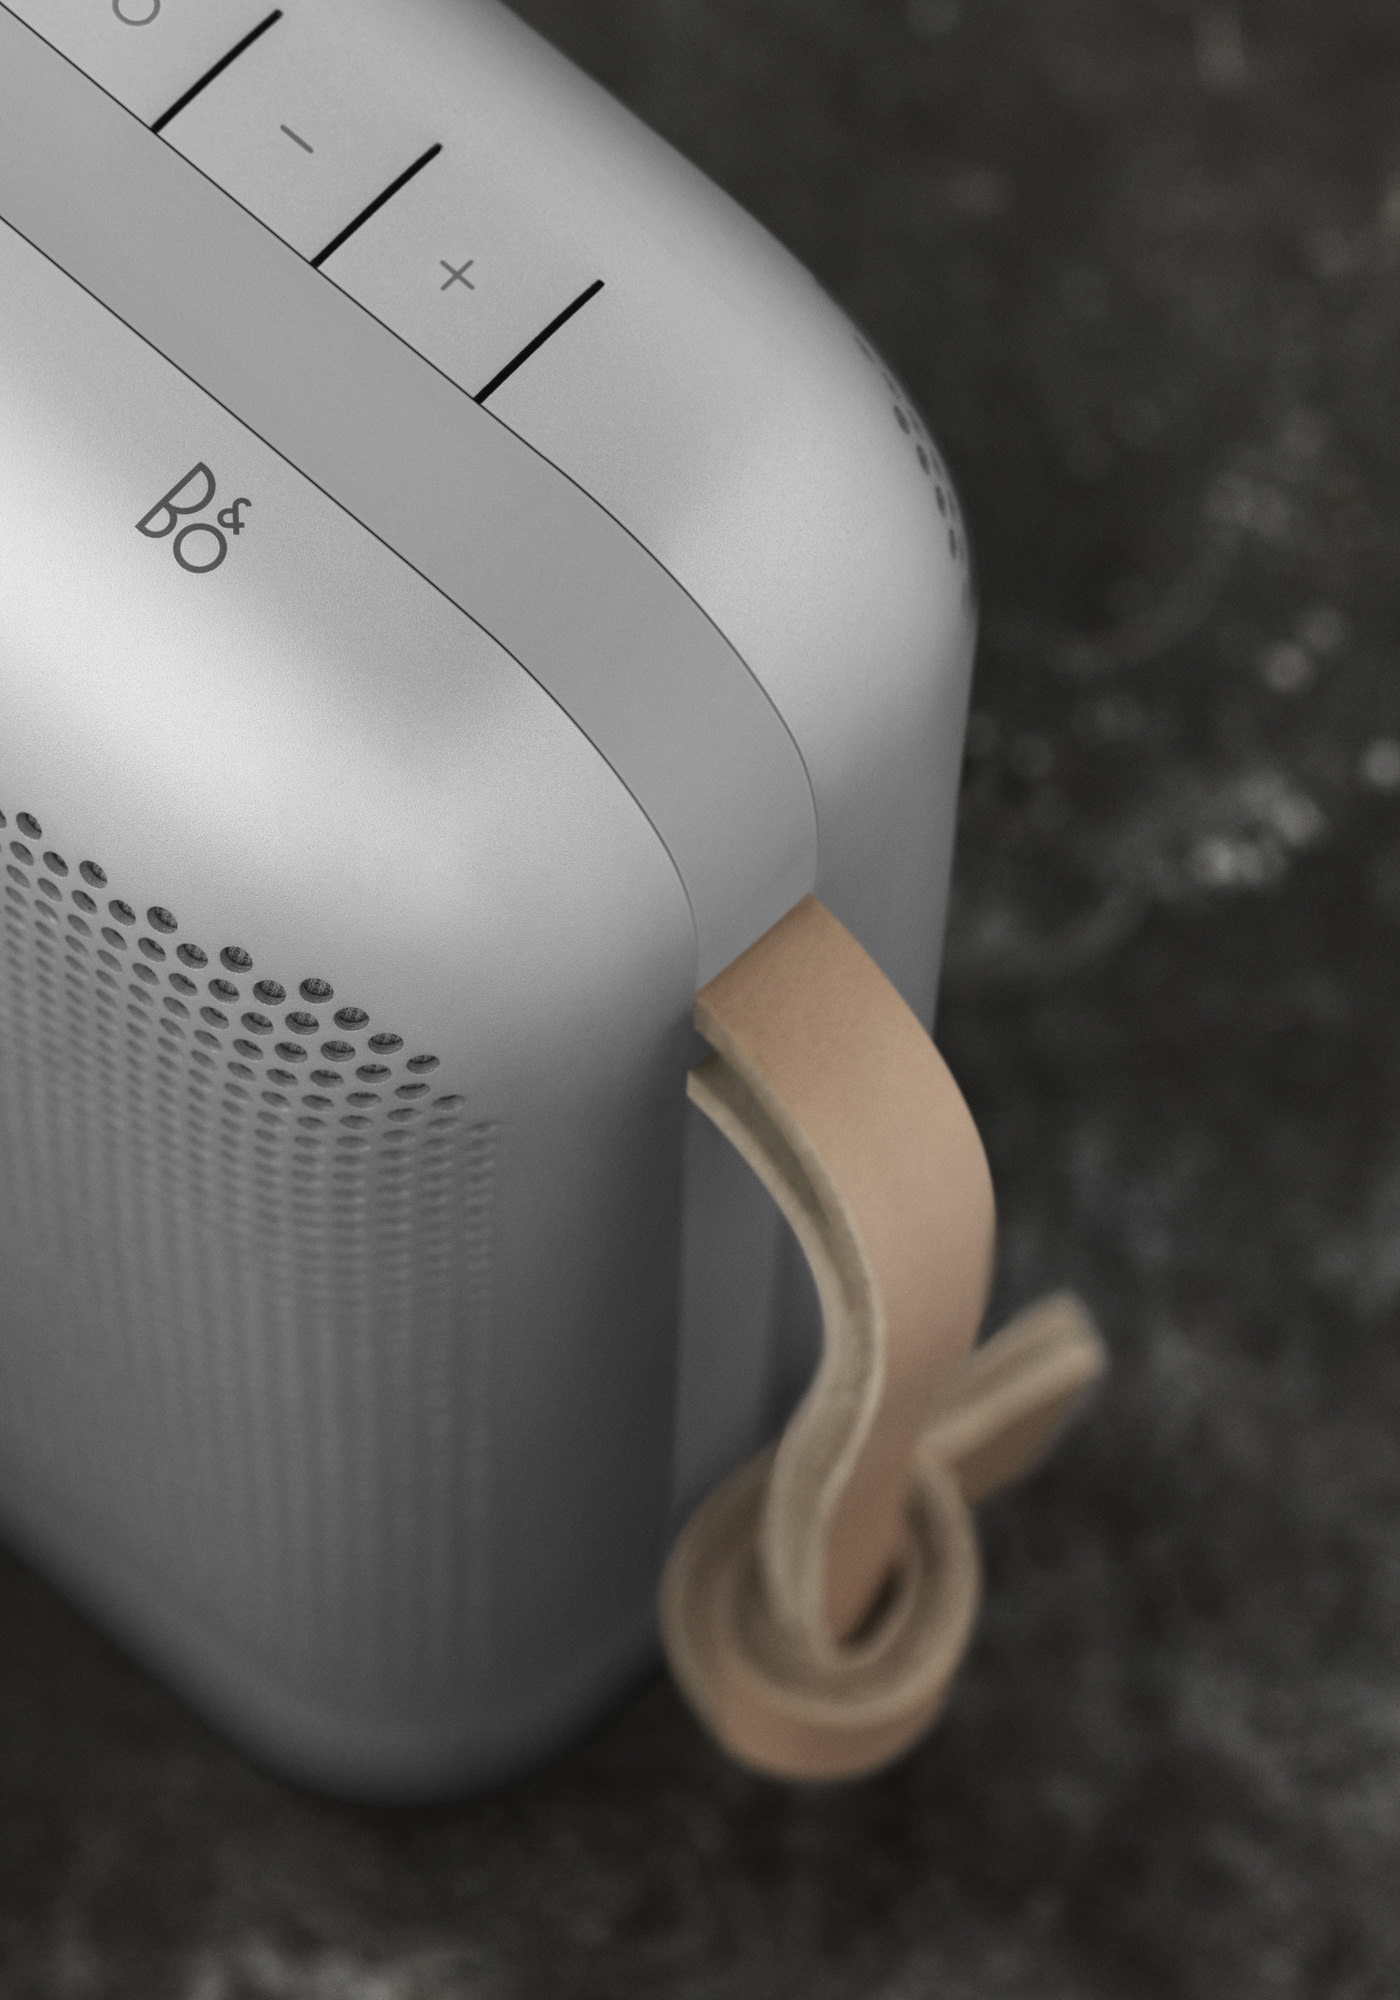 Enceinte Beoplay P6 Bang & Olufsen Silver Edition